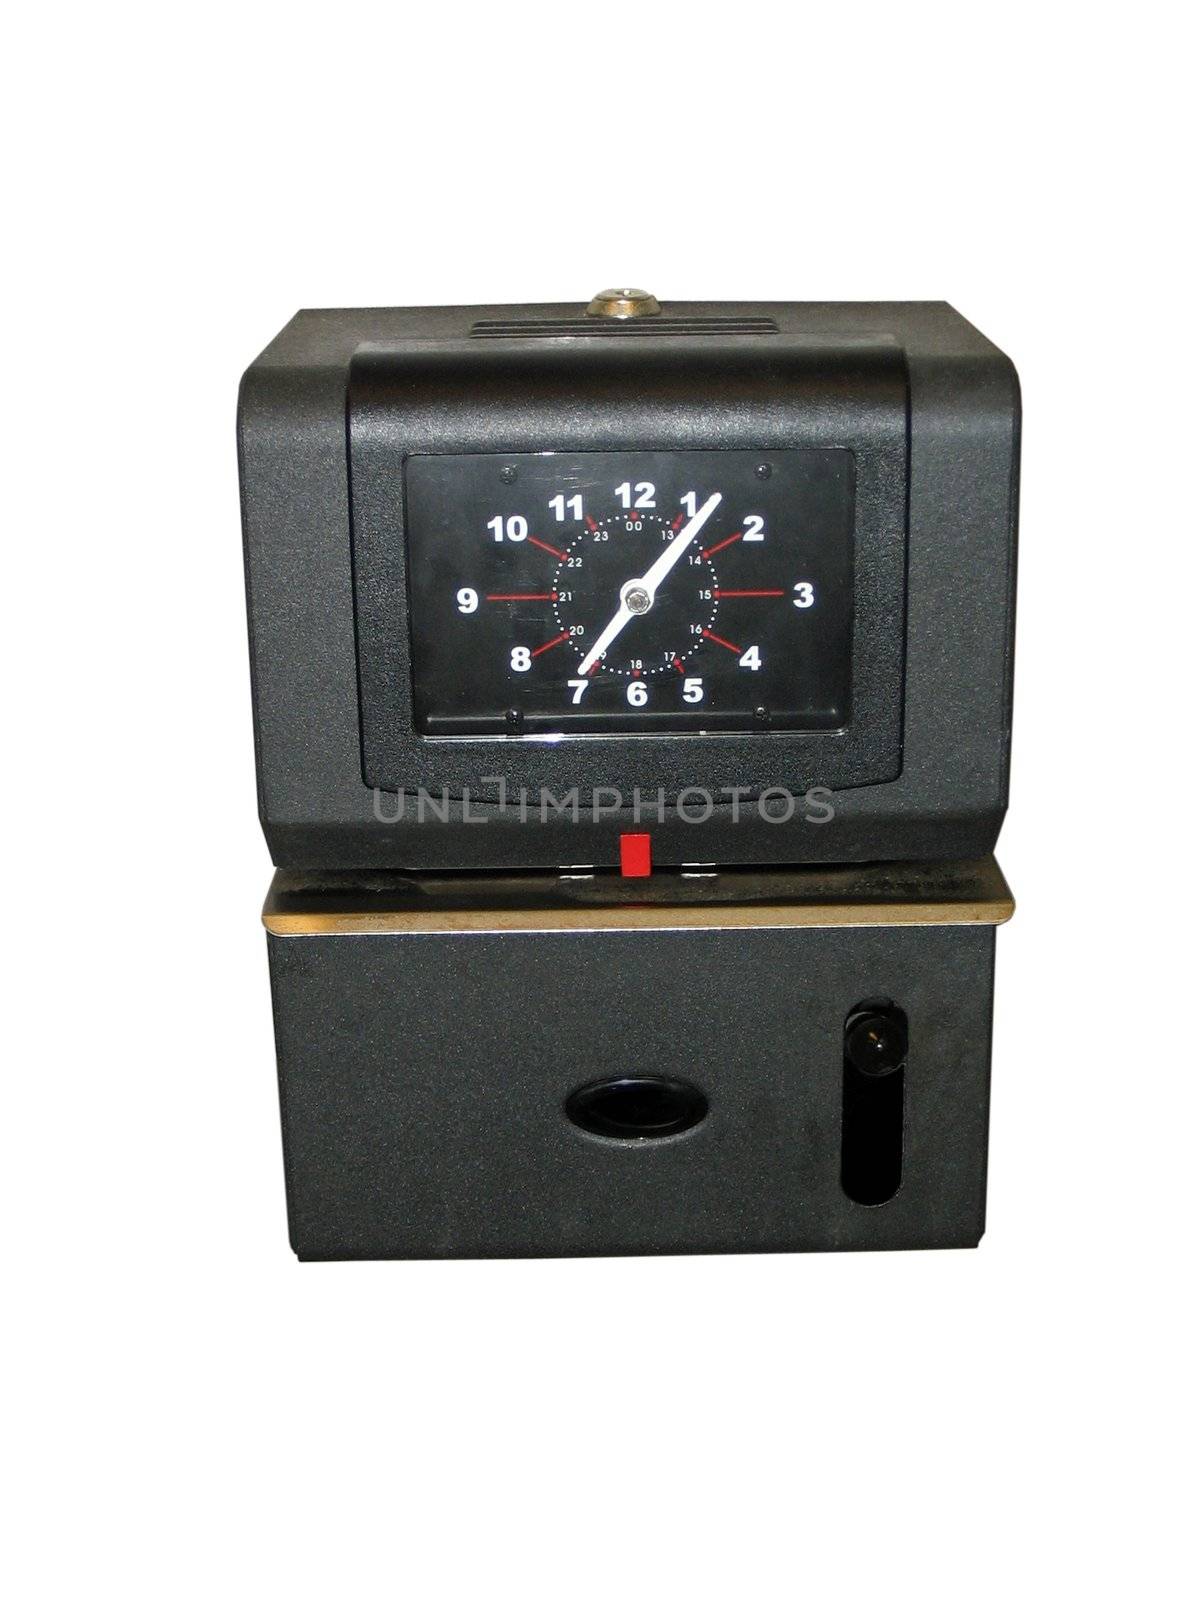 This is a picture of a black wall mounted time clock that has been cut-out and isolated on a white background.